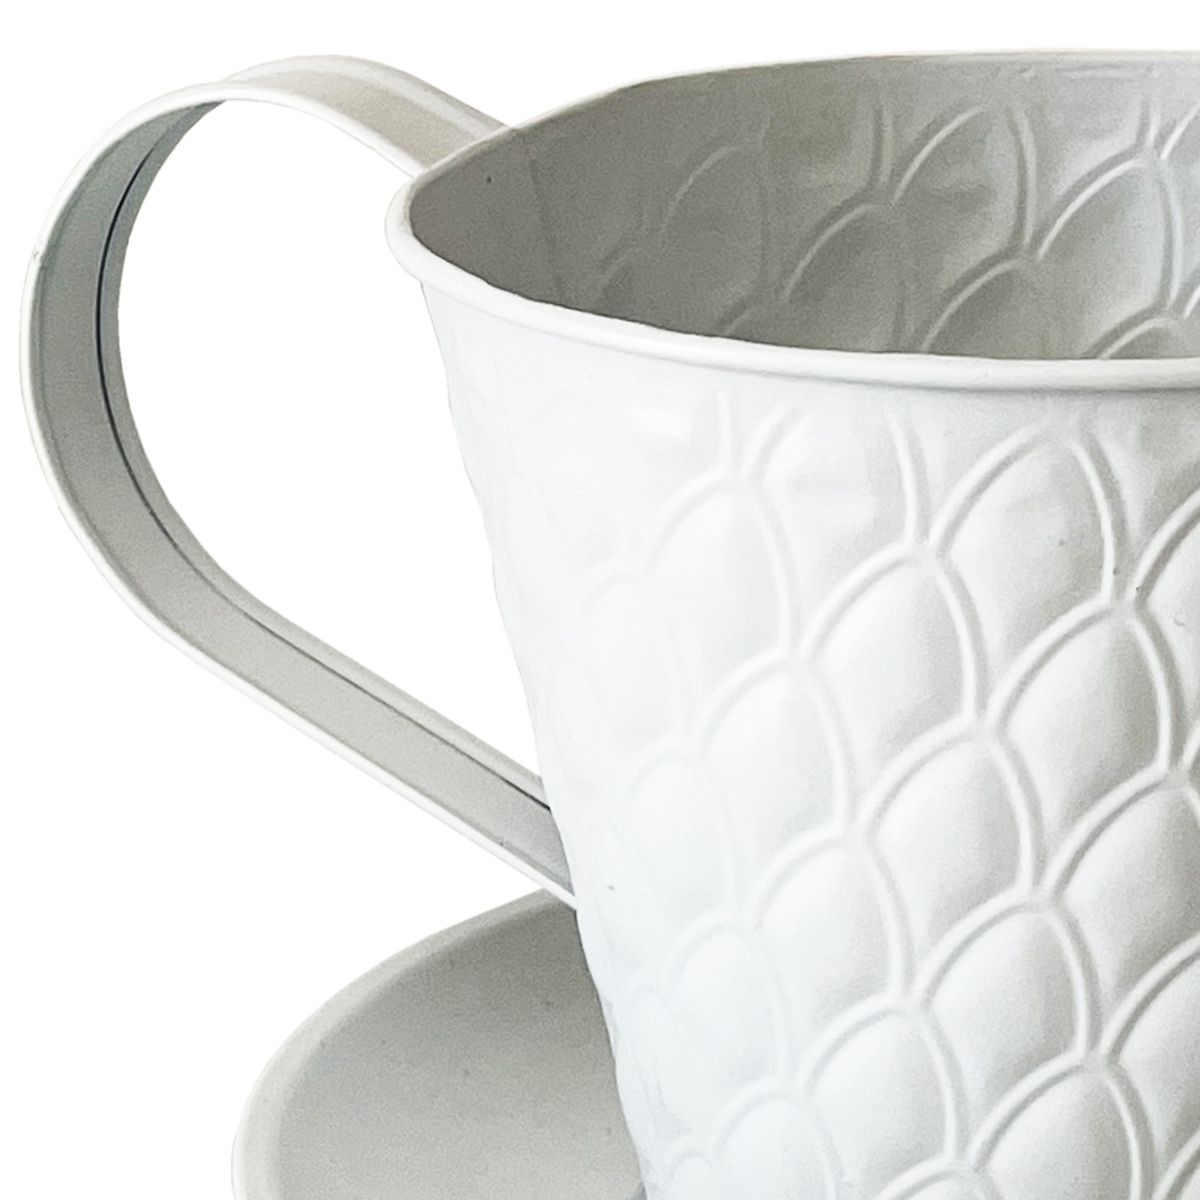 Flower pot cover in white metal in the shape of a cup